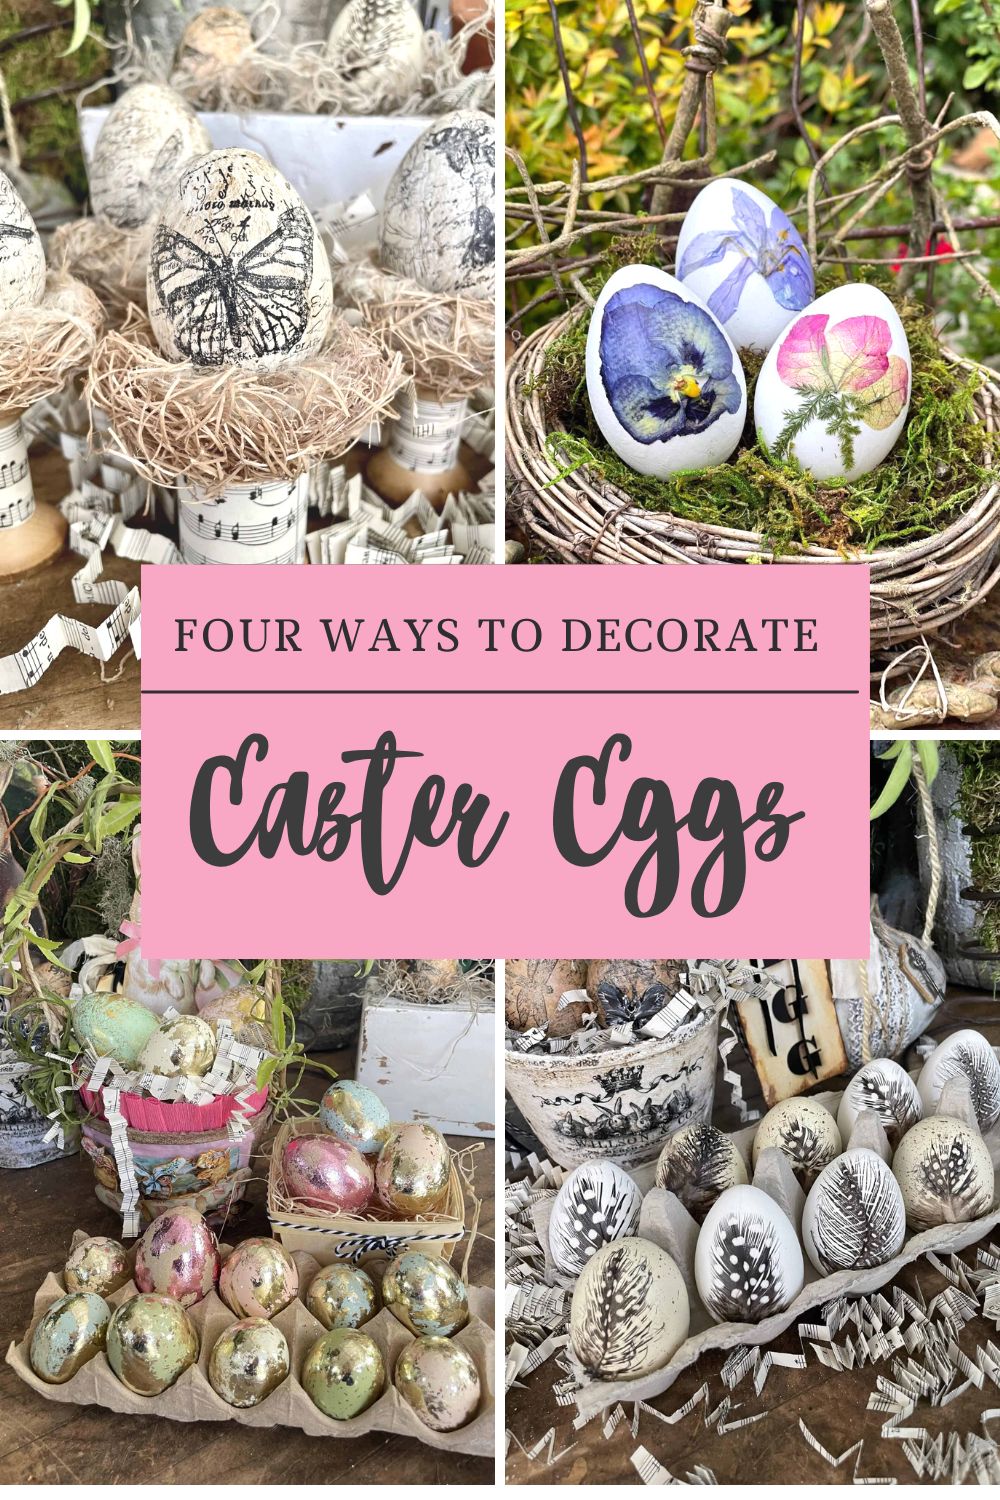 Adult Easter Egg Ideas;  Four of the Easiest Ways to Decorate Eggs